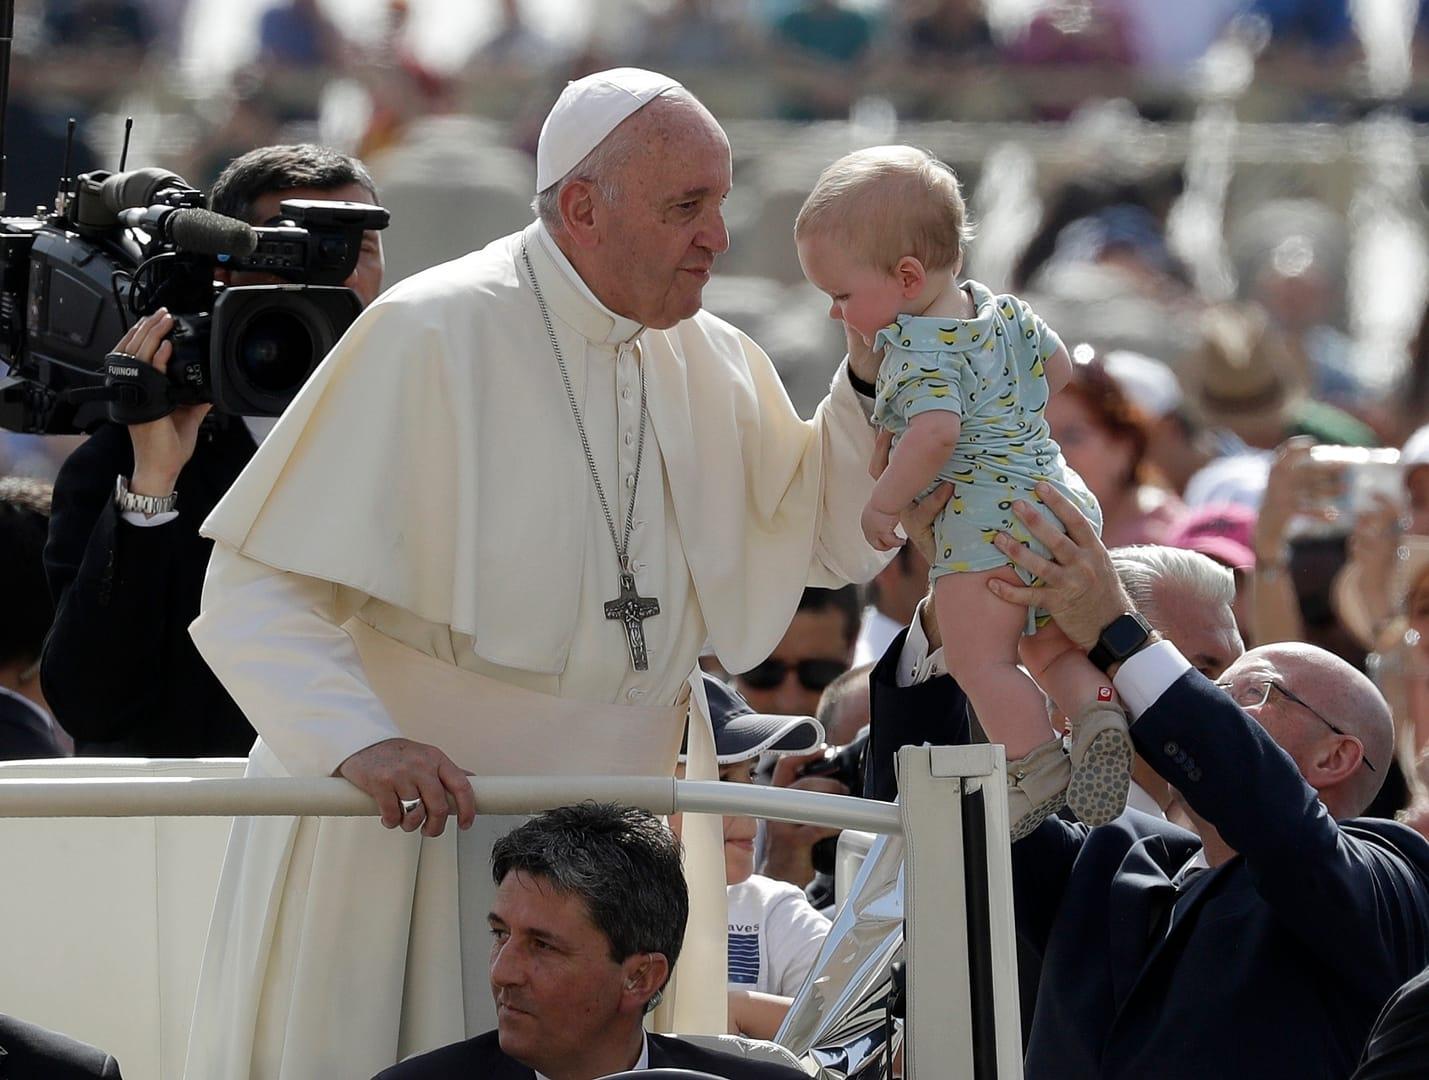 New book explores ‘tenderness’ of Pope Francis